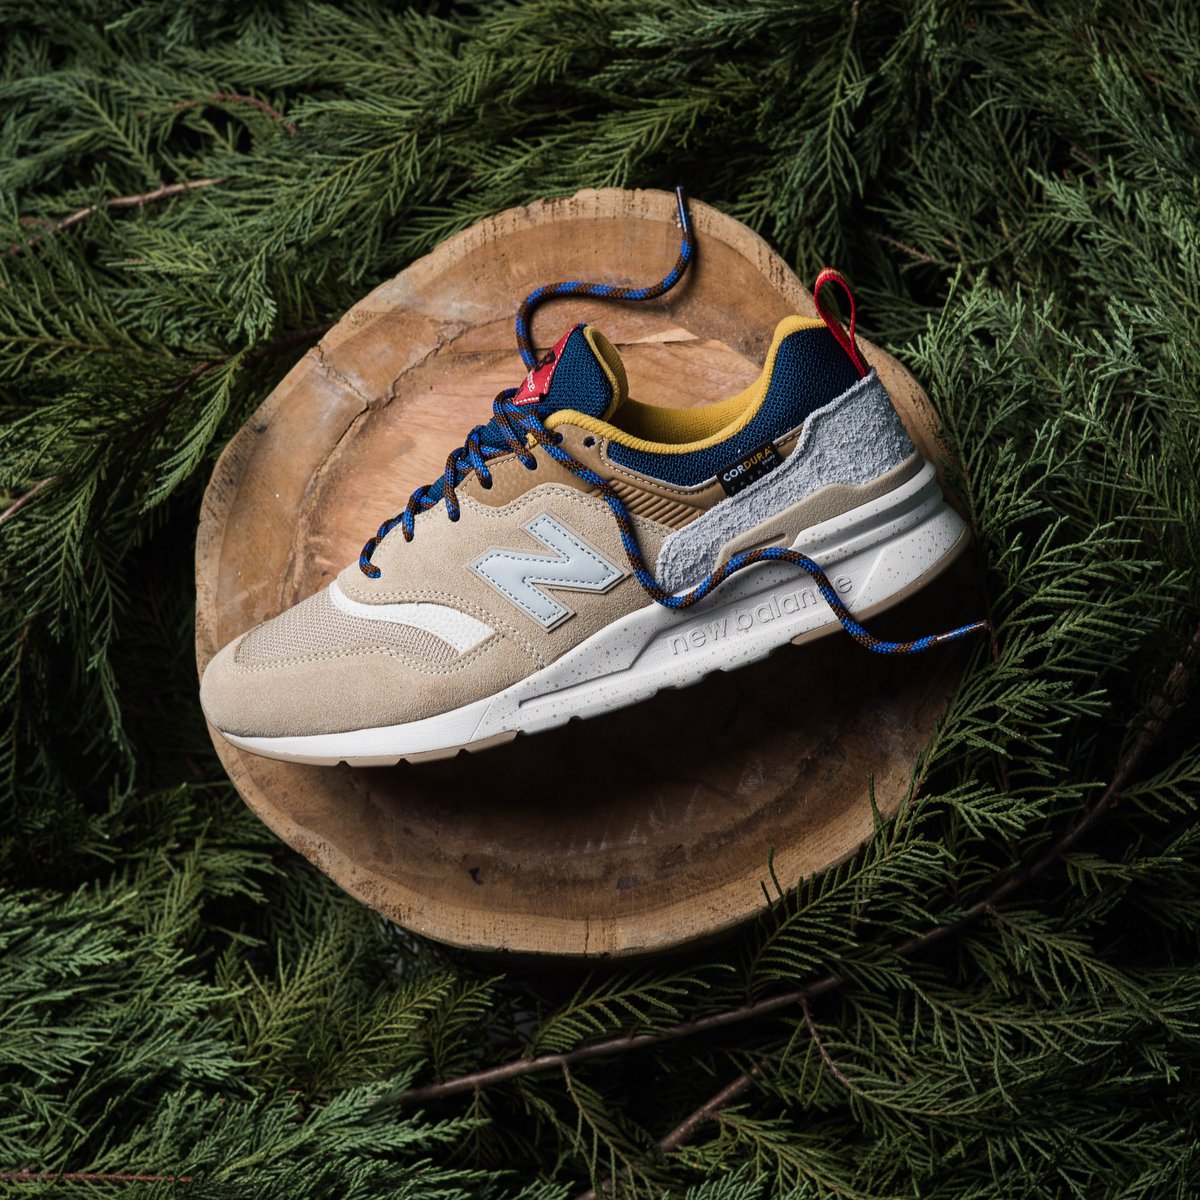 Sneaker on Twitter: "Now Available :: @newbalance CM997HFA 'Outdoor Pack' - Incense/Moroccan Tile :: https://t.co/1AWzxcsjBJ https://t.co/s3ON5xBGNU" / Twitter